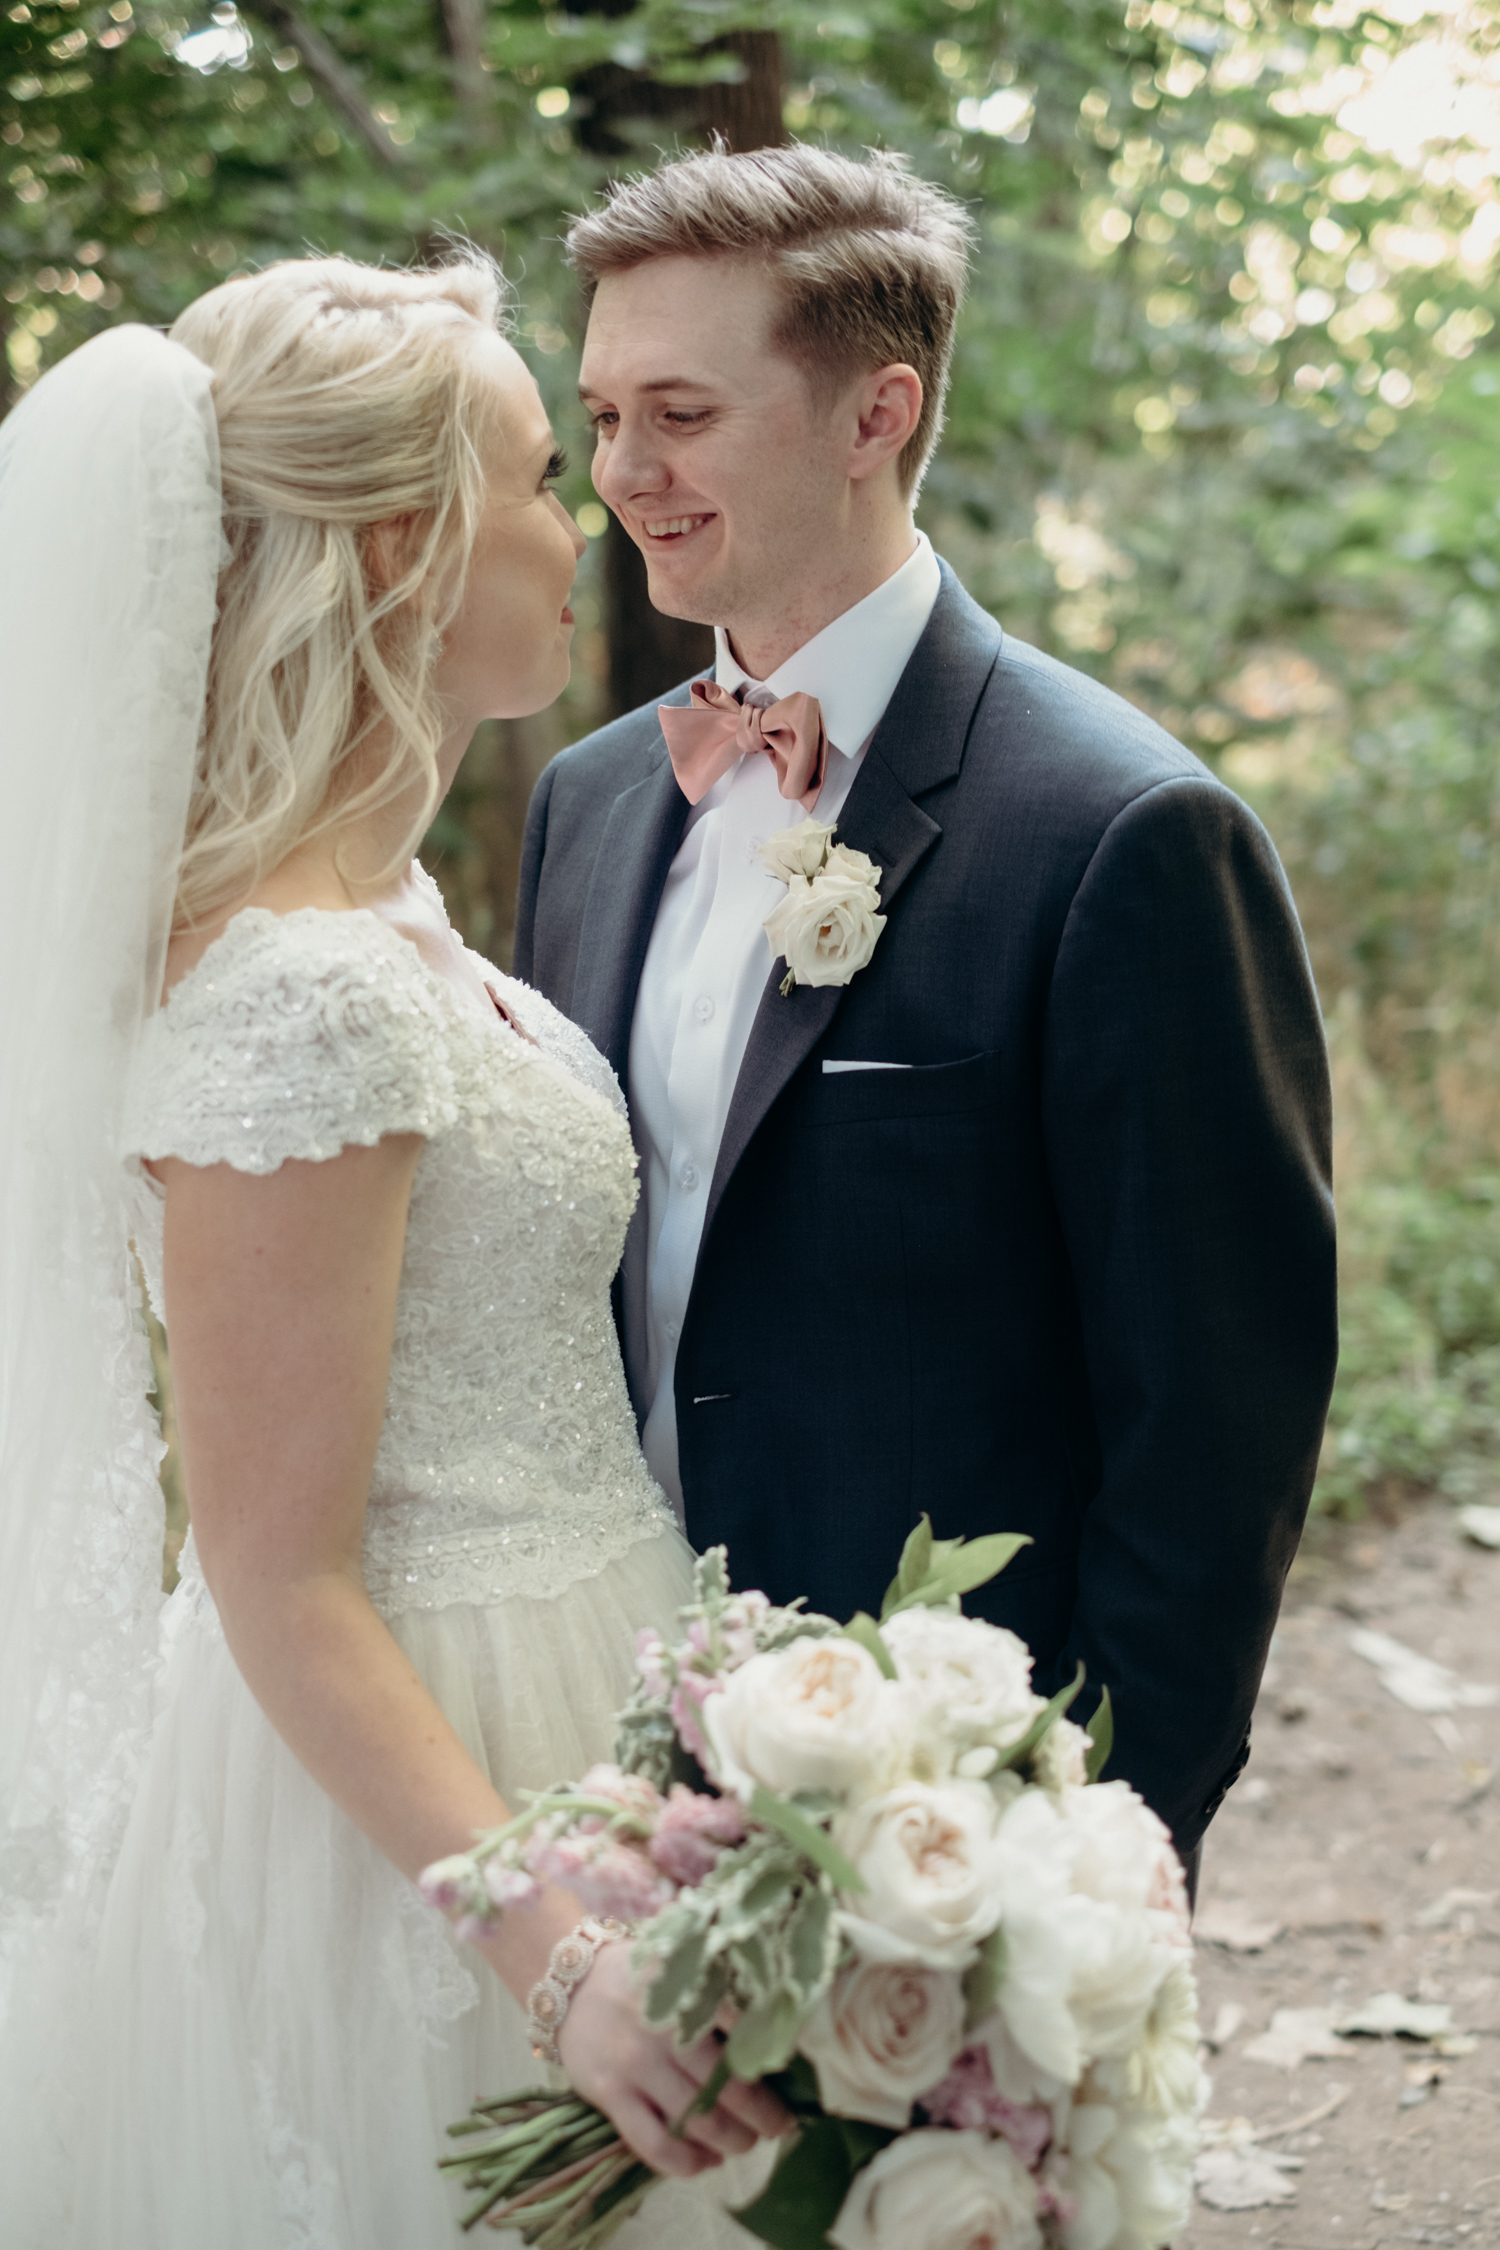 A bride carrying a bouquet of white and pink flowers looks into the eyes of her groom in a peach bowtie in the woods at Lansdowne Resort and Golf Course. 